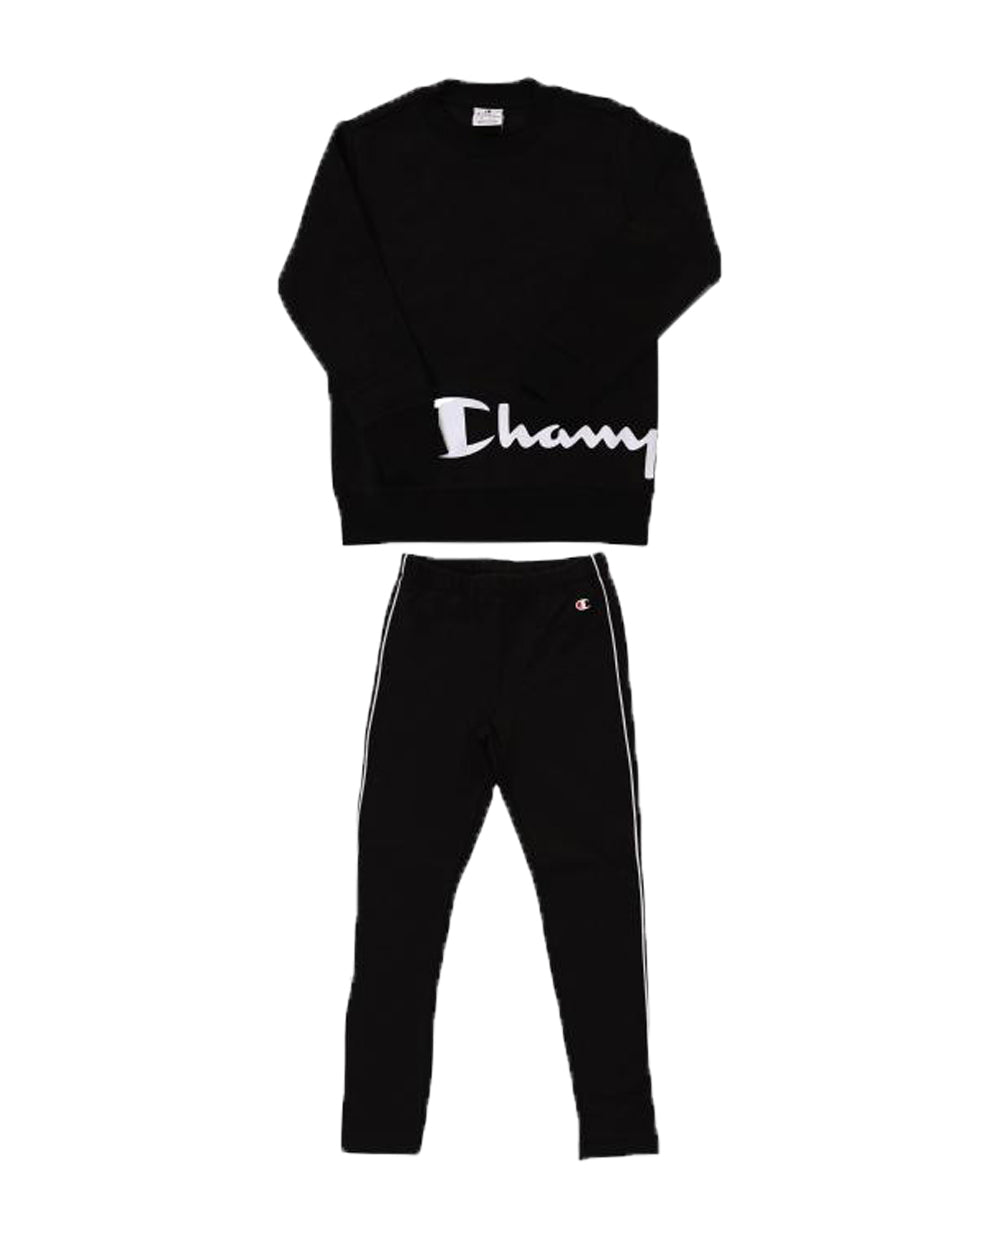 Champion Black Tracksuit with White